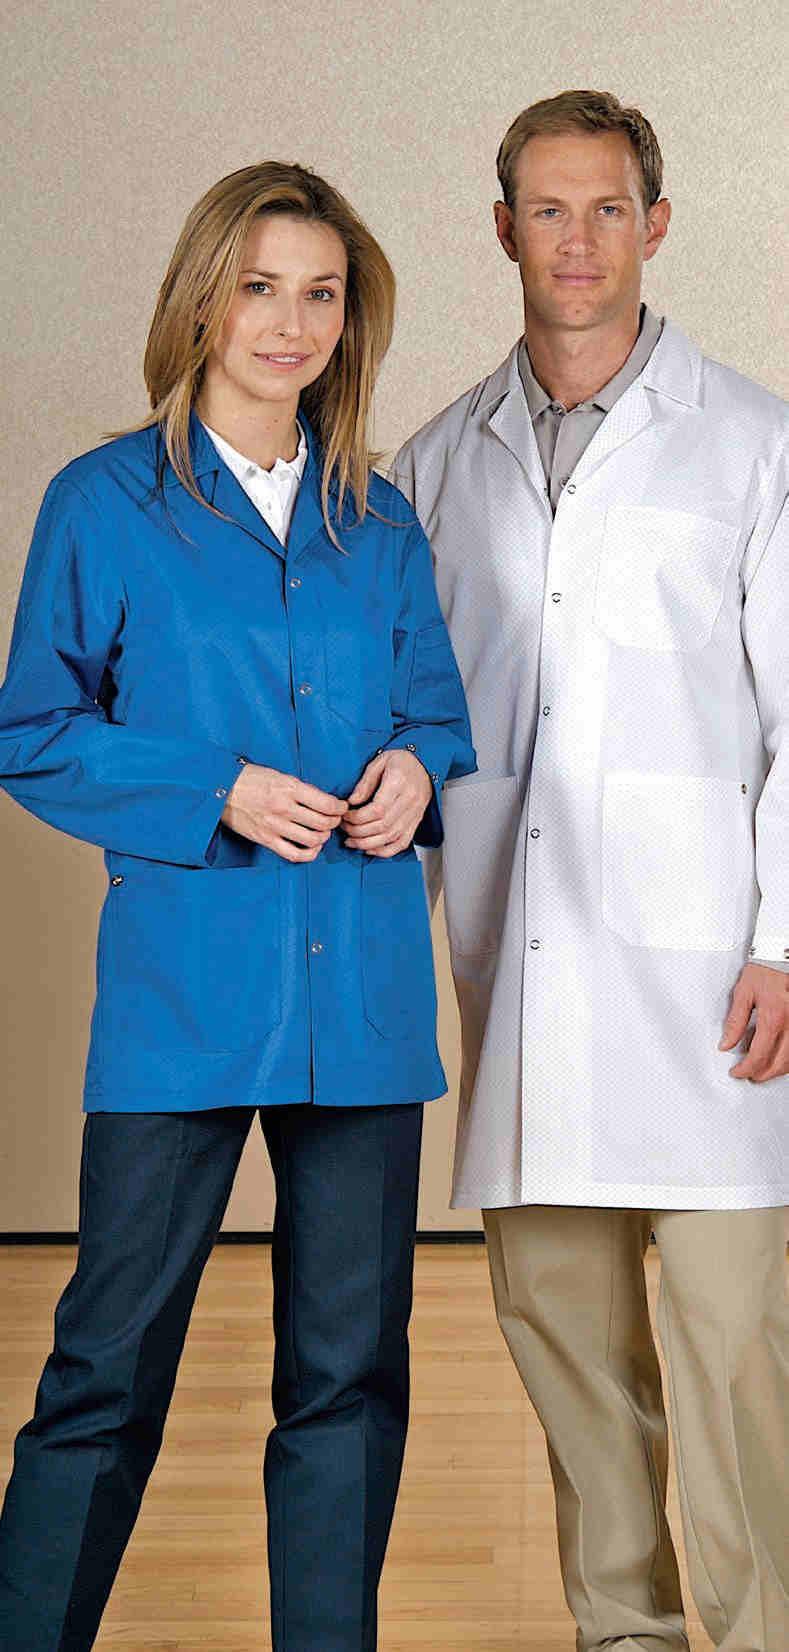 ESD WEAR Esd lab Coat Specifically-designed for ESD environments where static control is essential, the lightweight coat features two lower pockets, single chest pocket